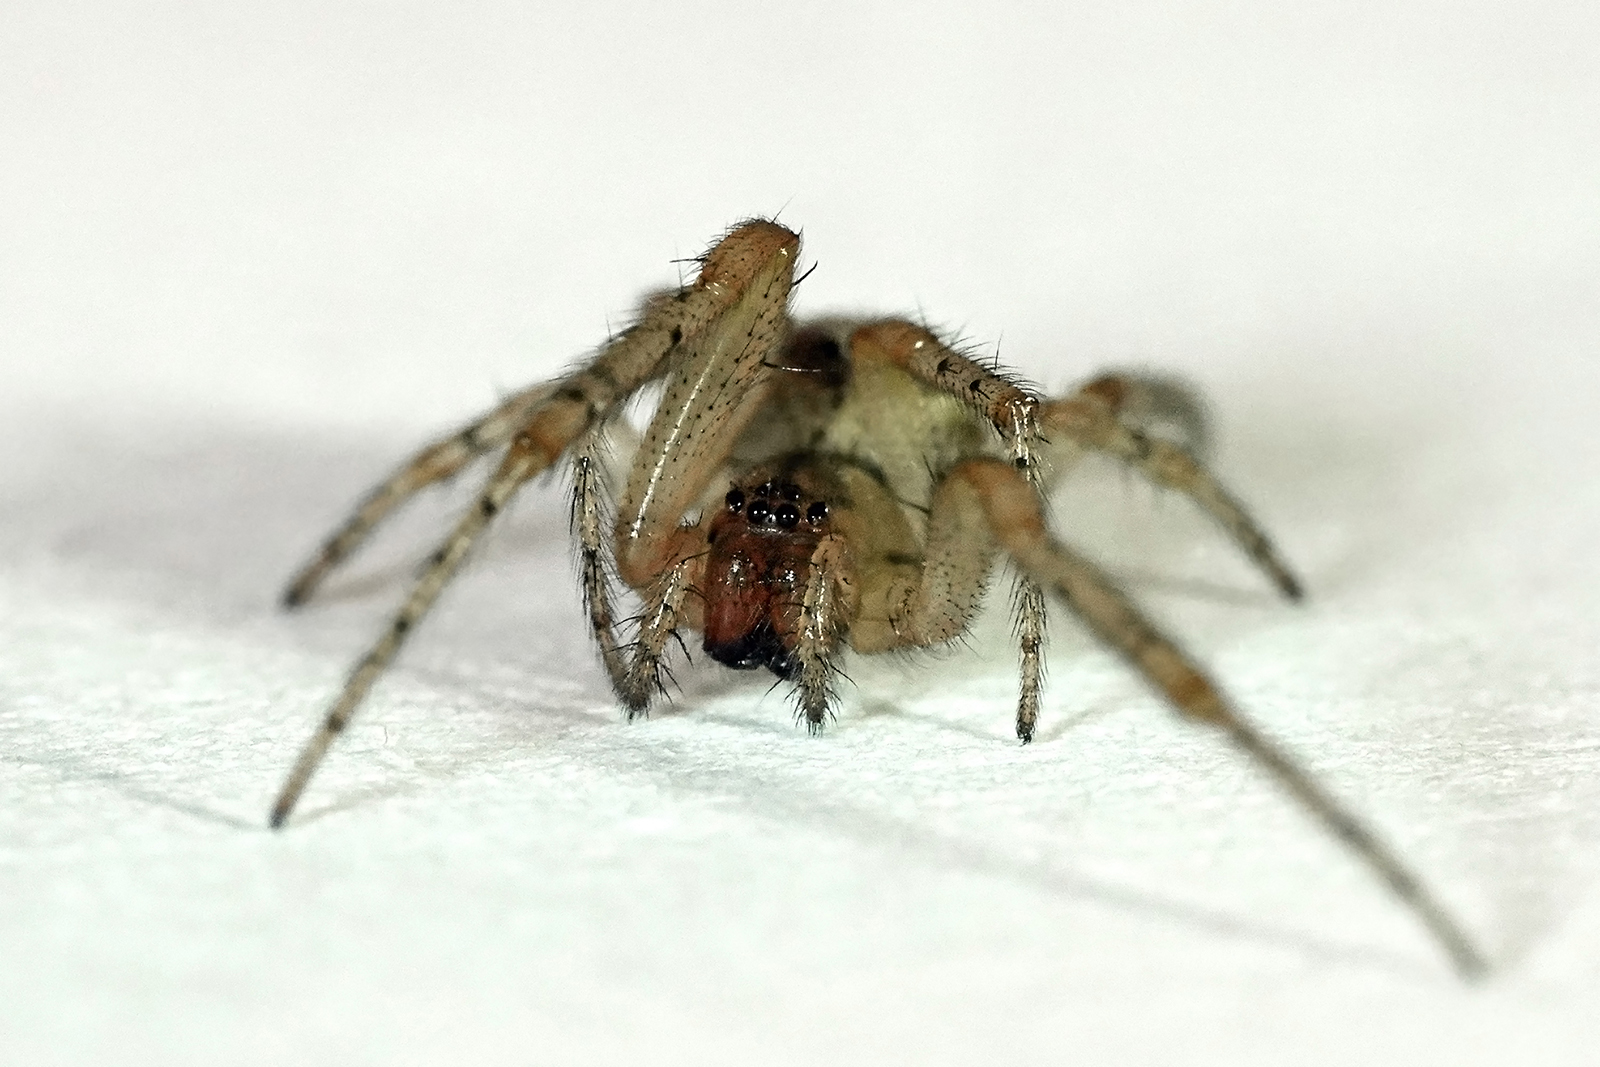 Do spiders feel pain when you kill them?